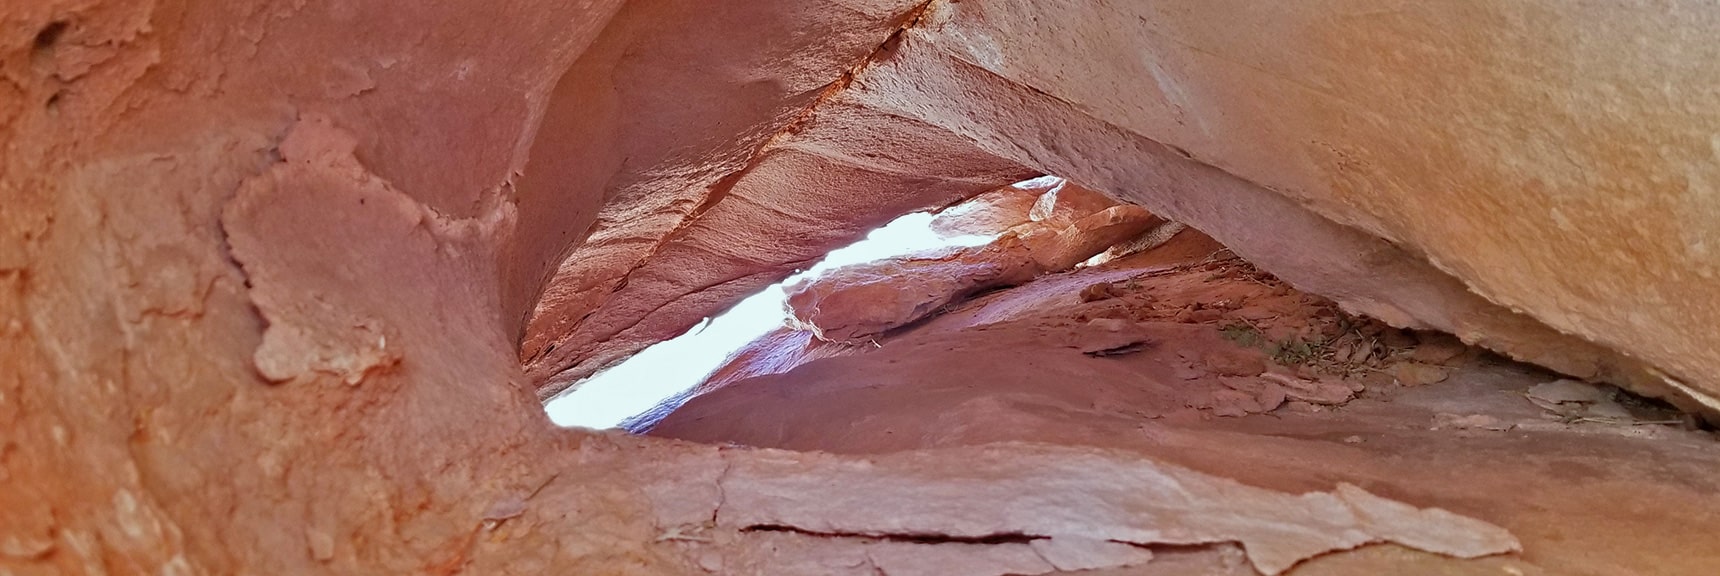 Intricate Openings in Jurassic Era Aztec Red Rock: "Light at the End of the Tunnel" | Bowl of Fire, Lake Mead National Recreation Area, Nevada